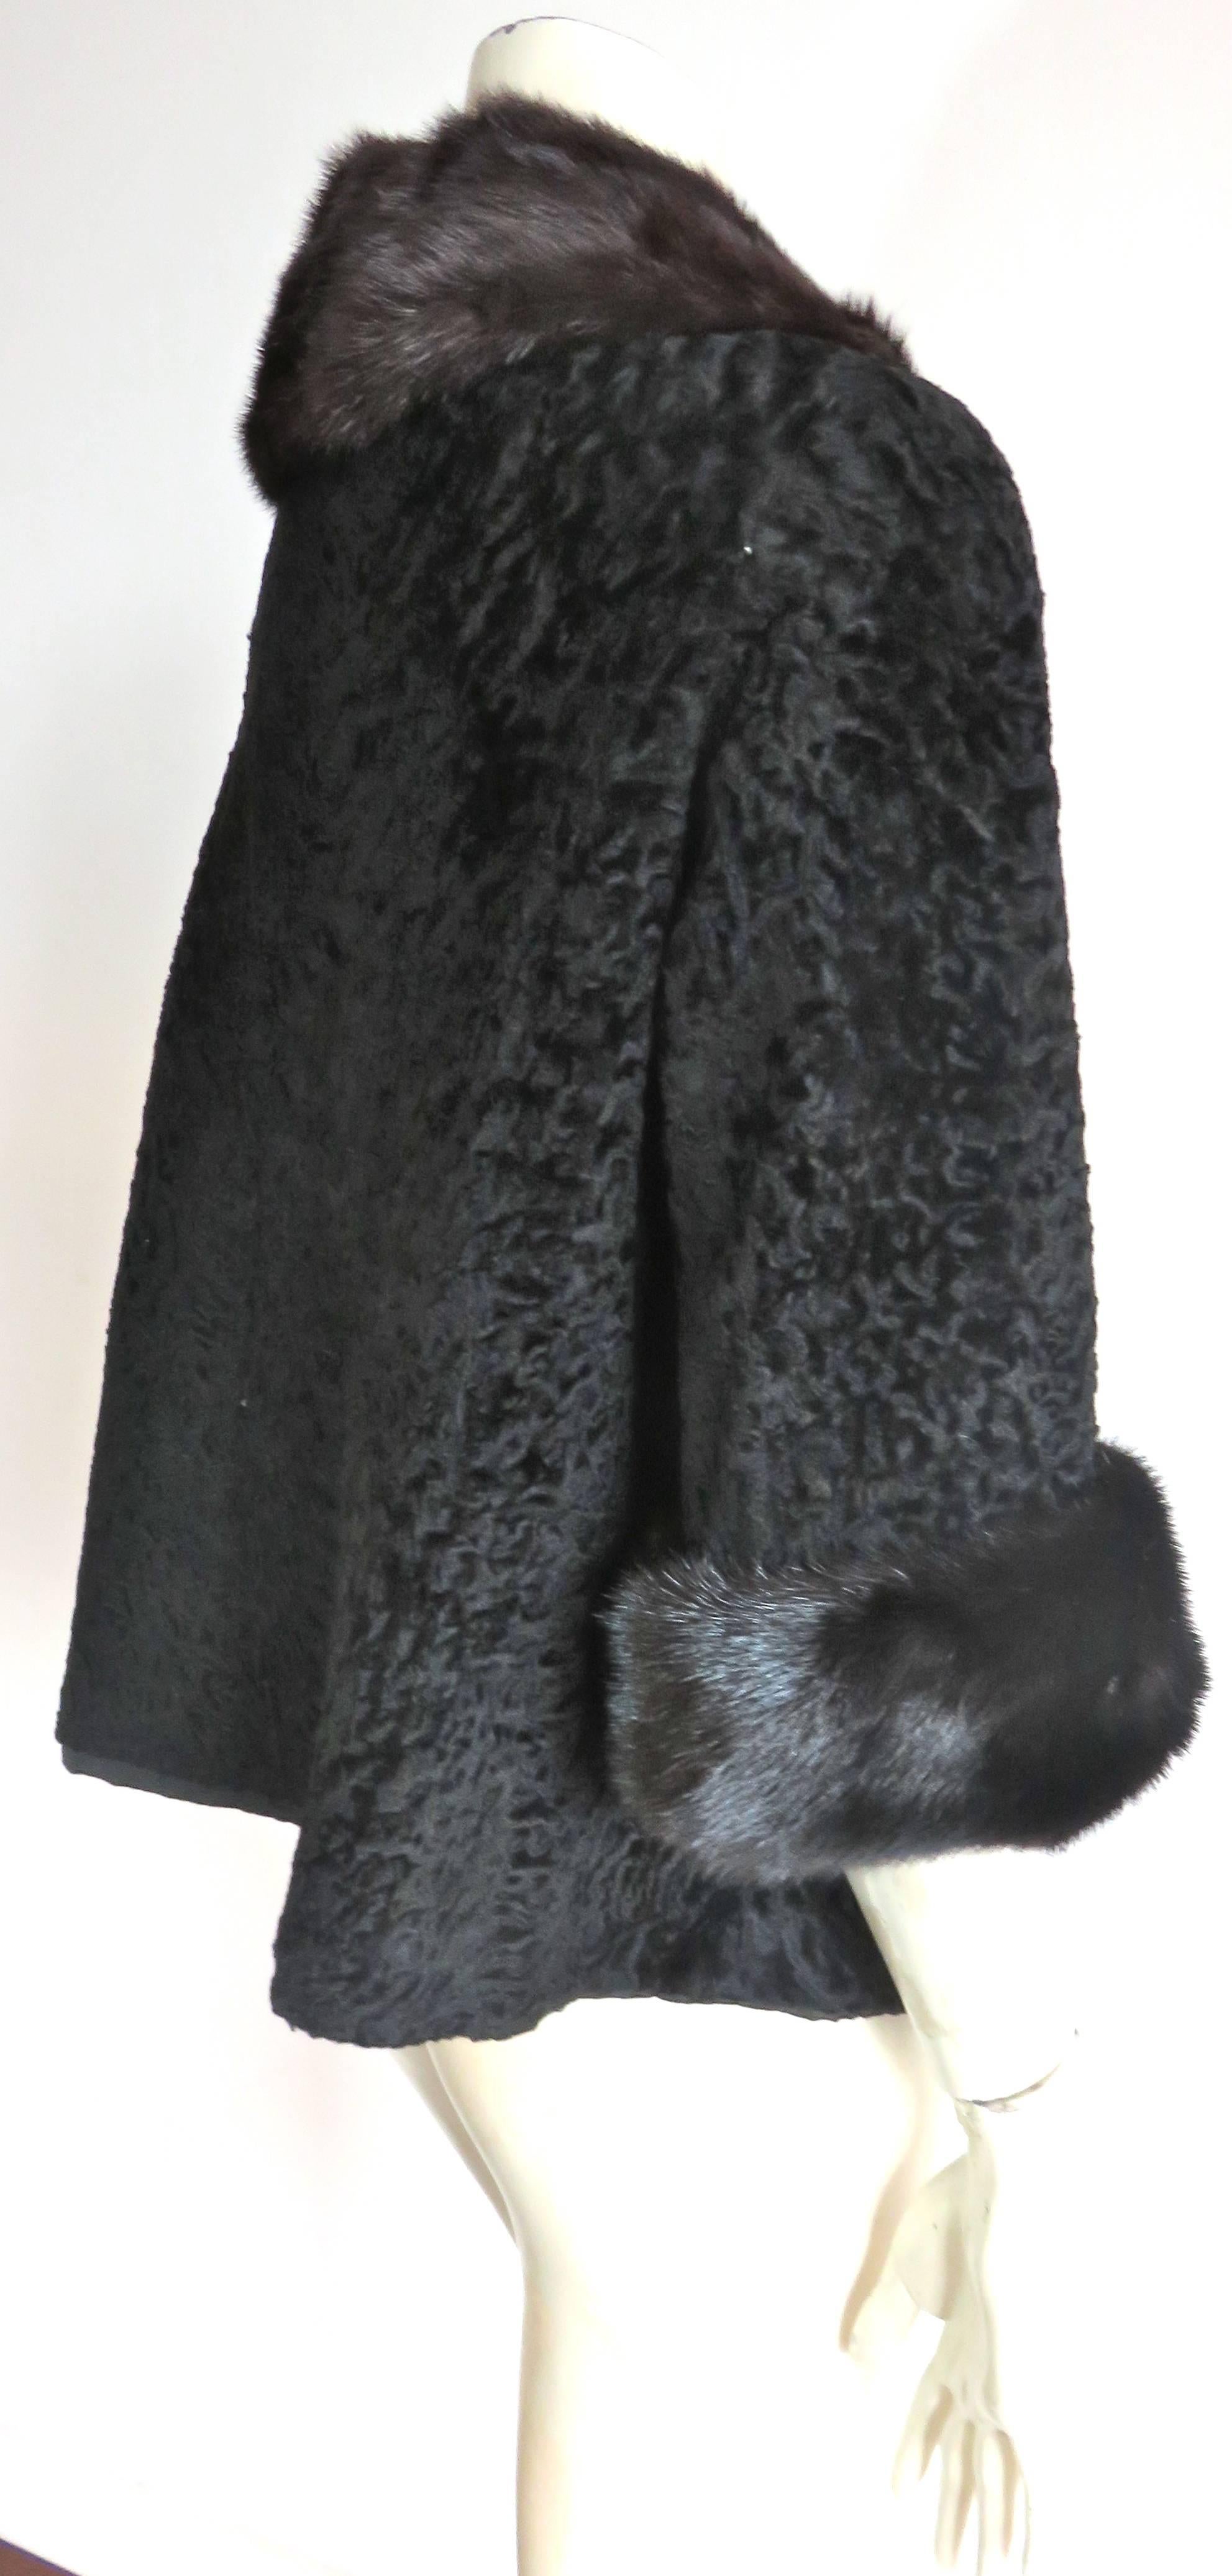 Mint condition 1960's BROADTAIL & MINK FUR JACKET In Excellent Condition For Sale In Newport Beach, CA